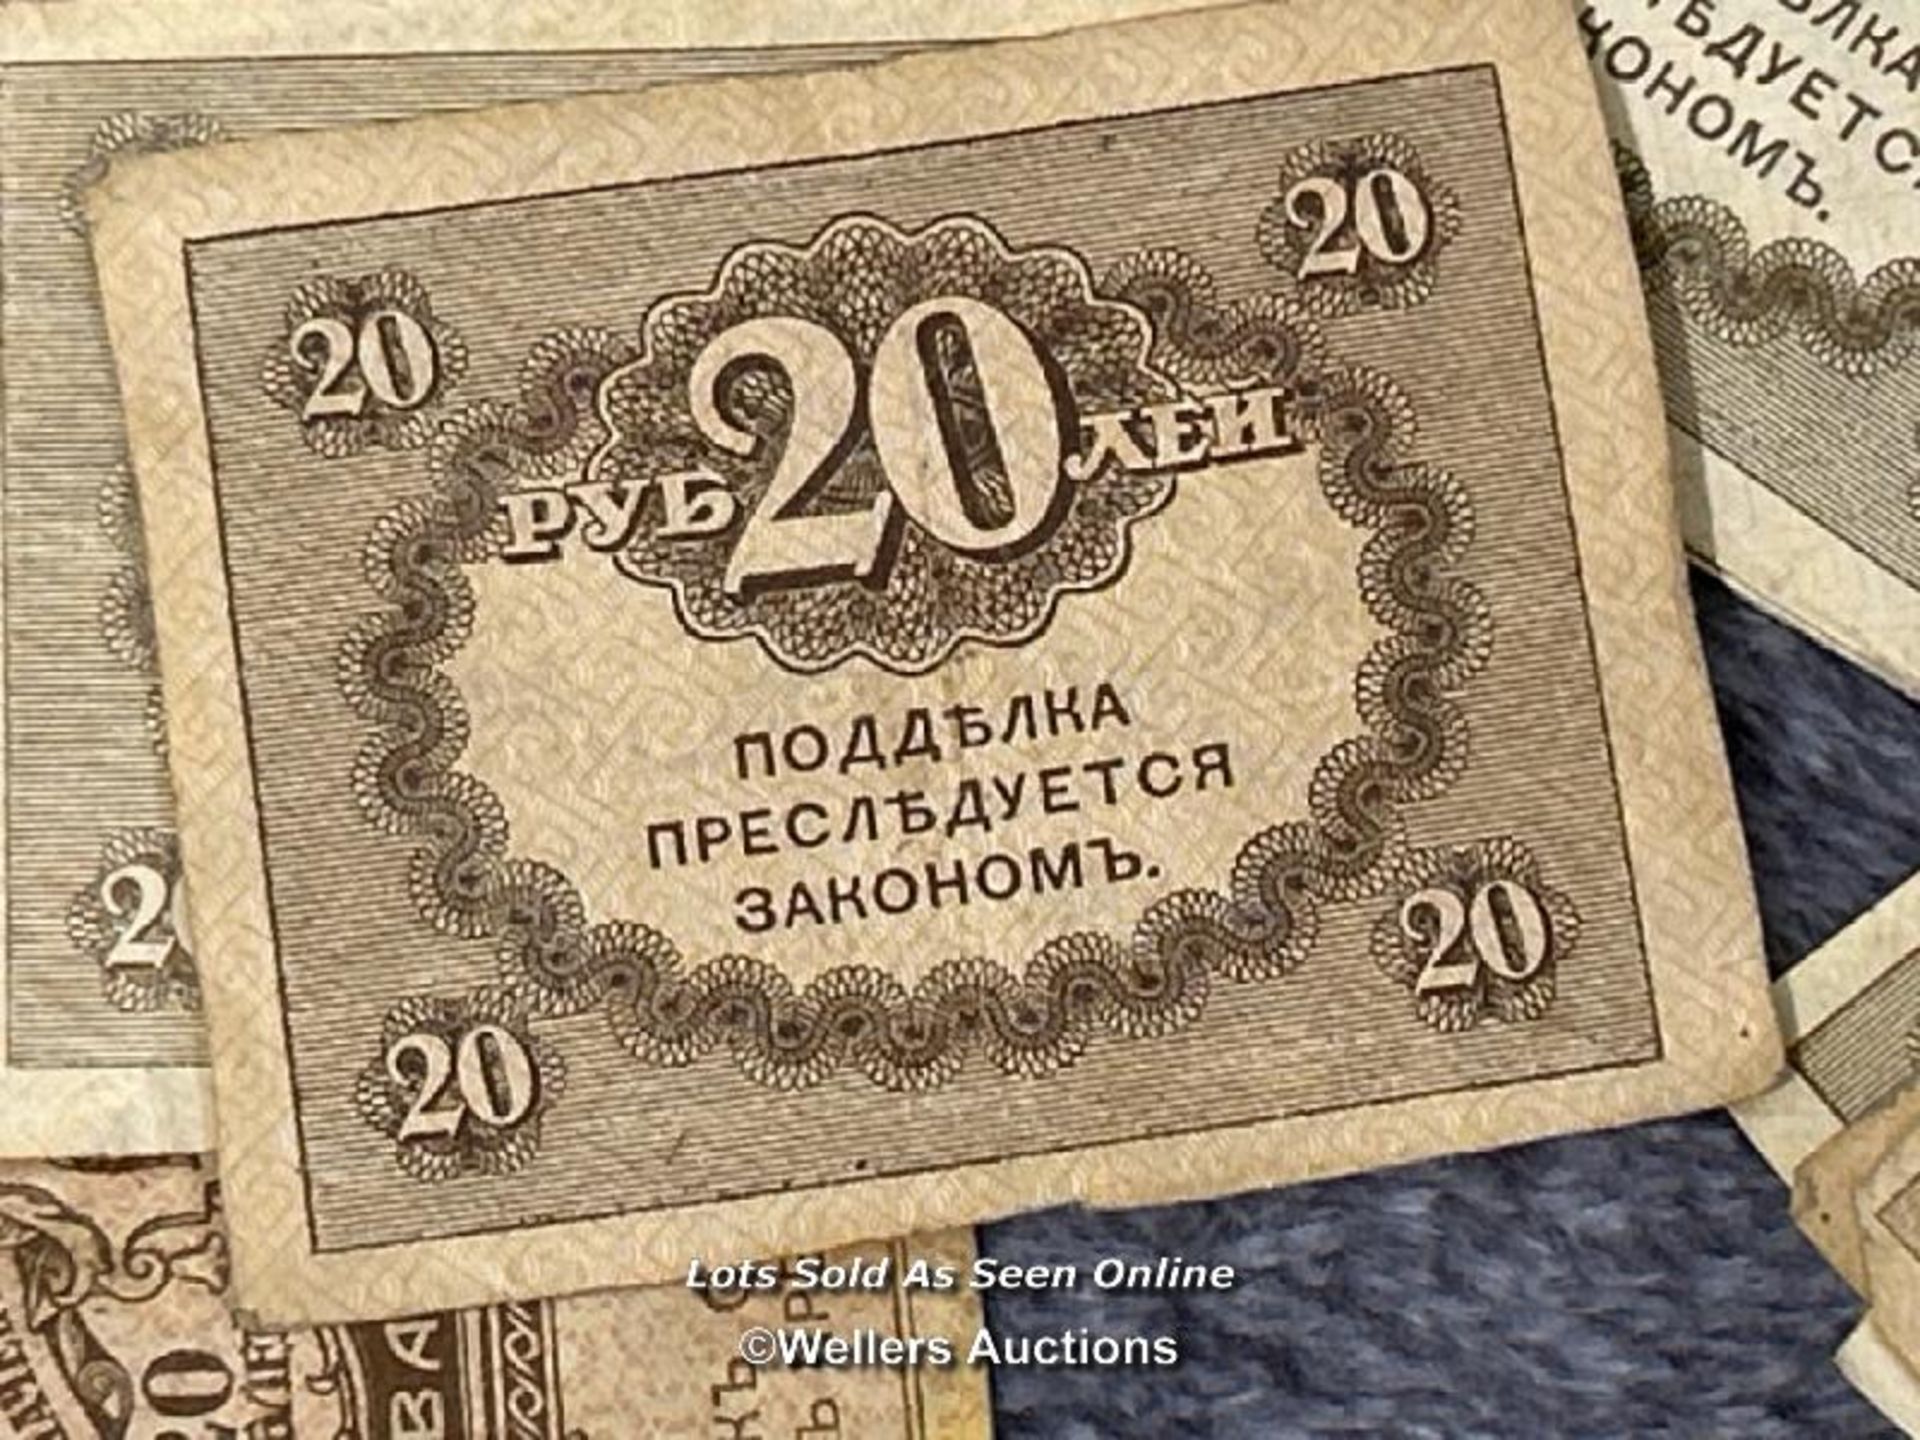 Large quantity of old Russian 20 rubles notes / AN20 - Image 3 of 3